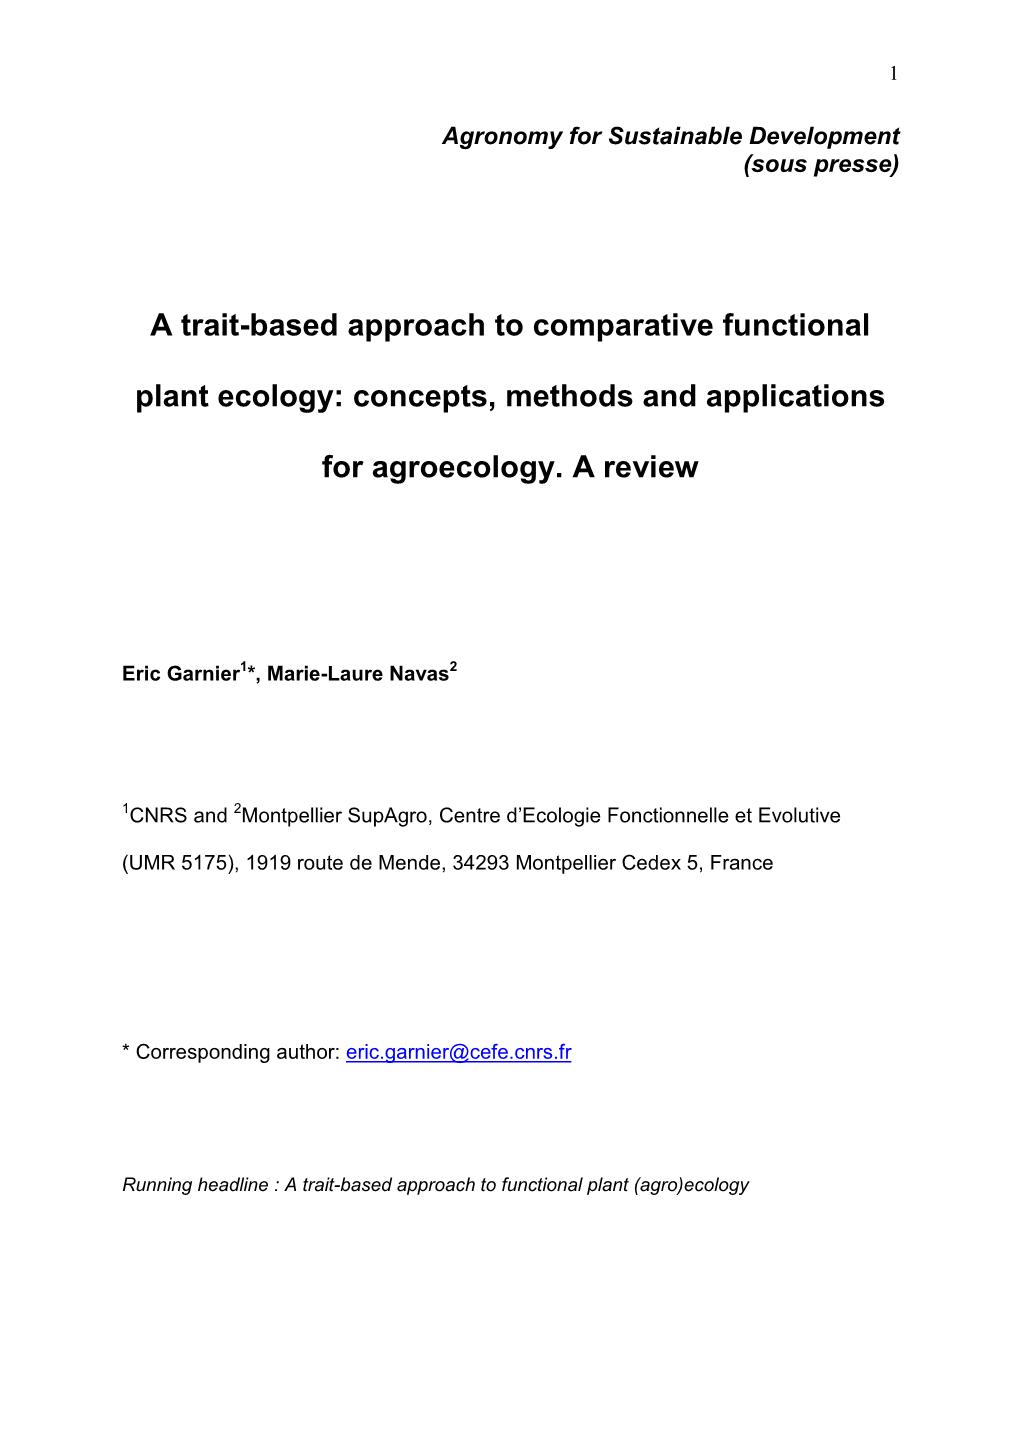 A Trait-Based Approach to Comparative Functional Plant Ecology